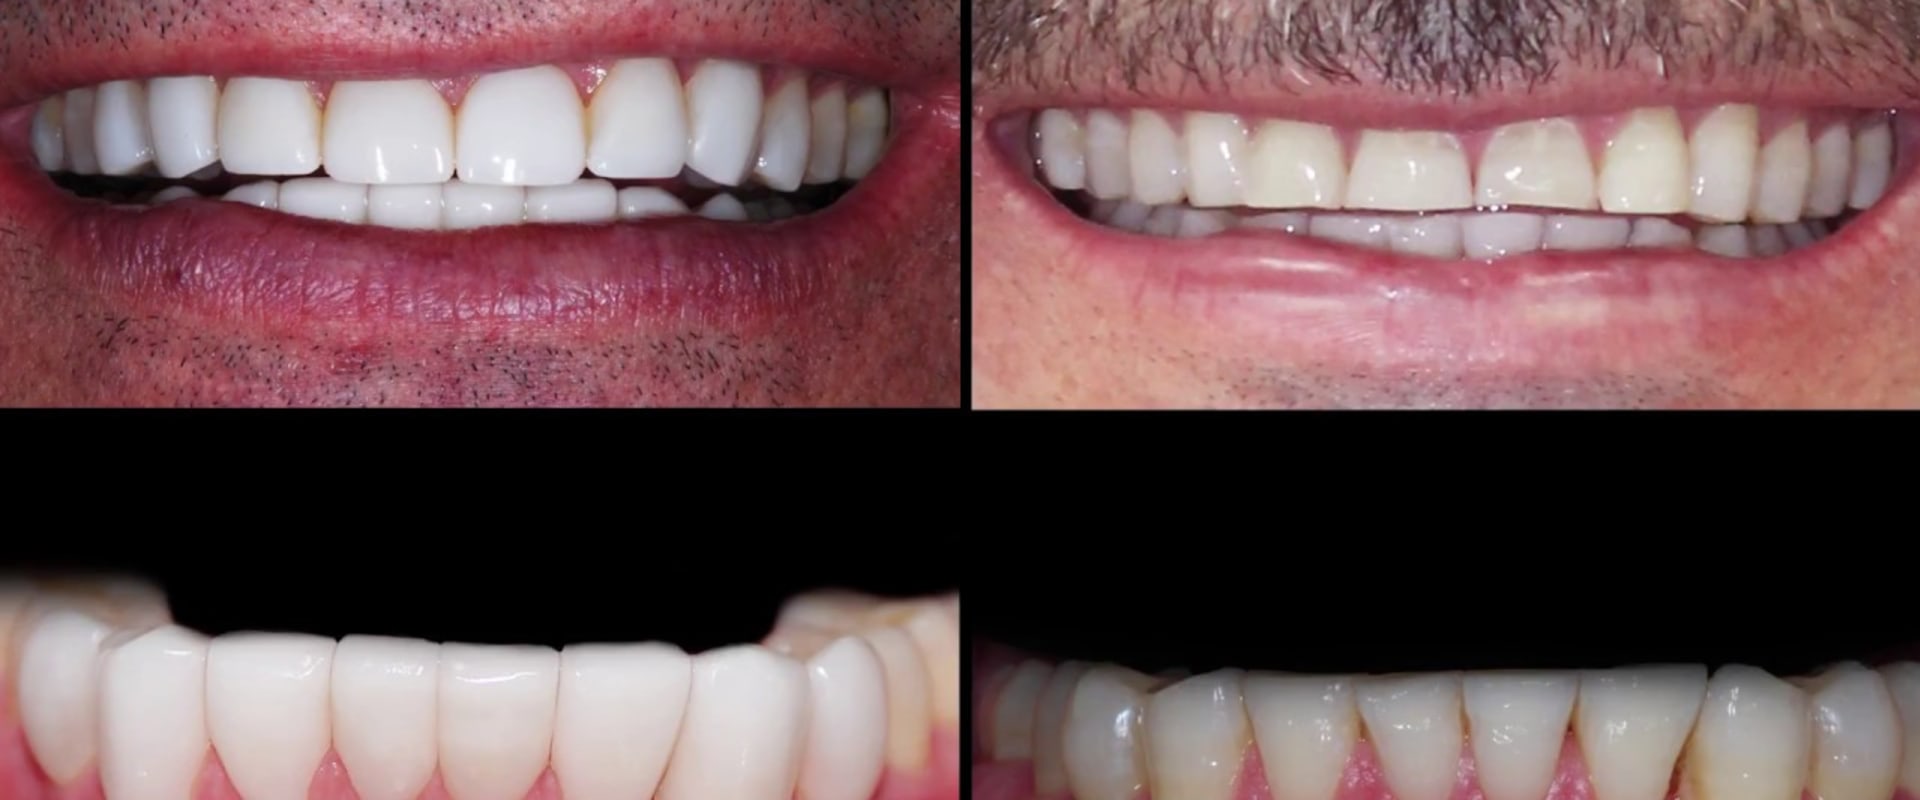 How many dental visits do you need for veneers?